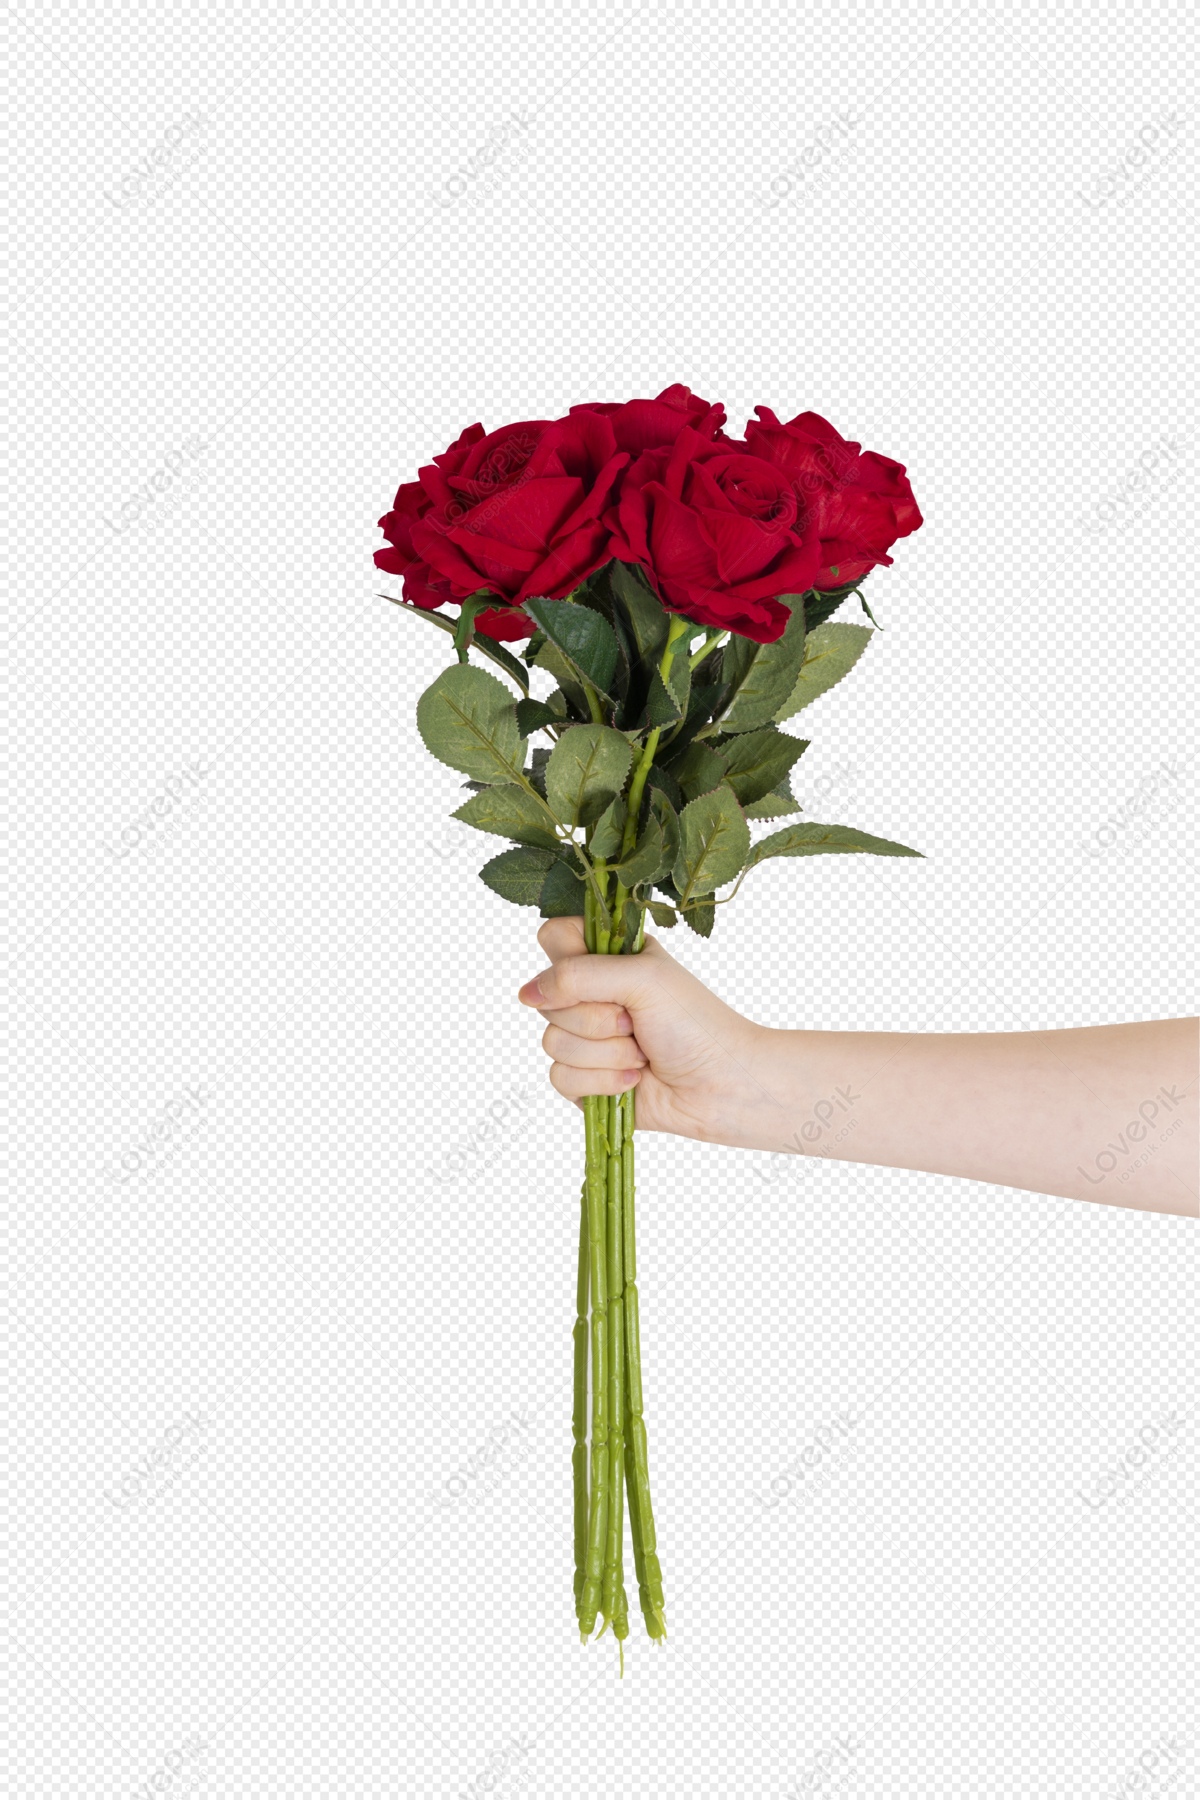 rose on transparent background for Valentine's Day 18871786 PNG